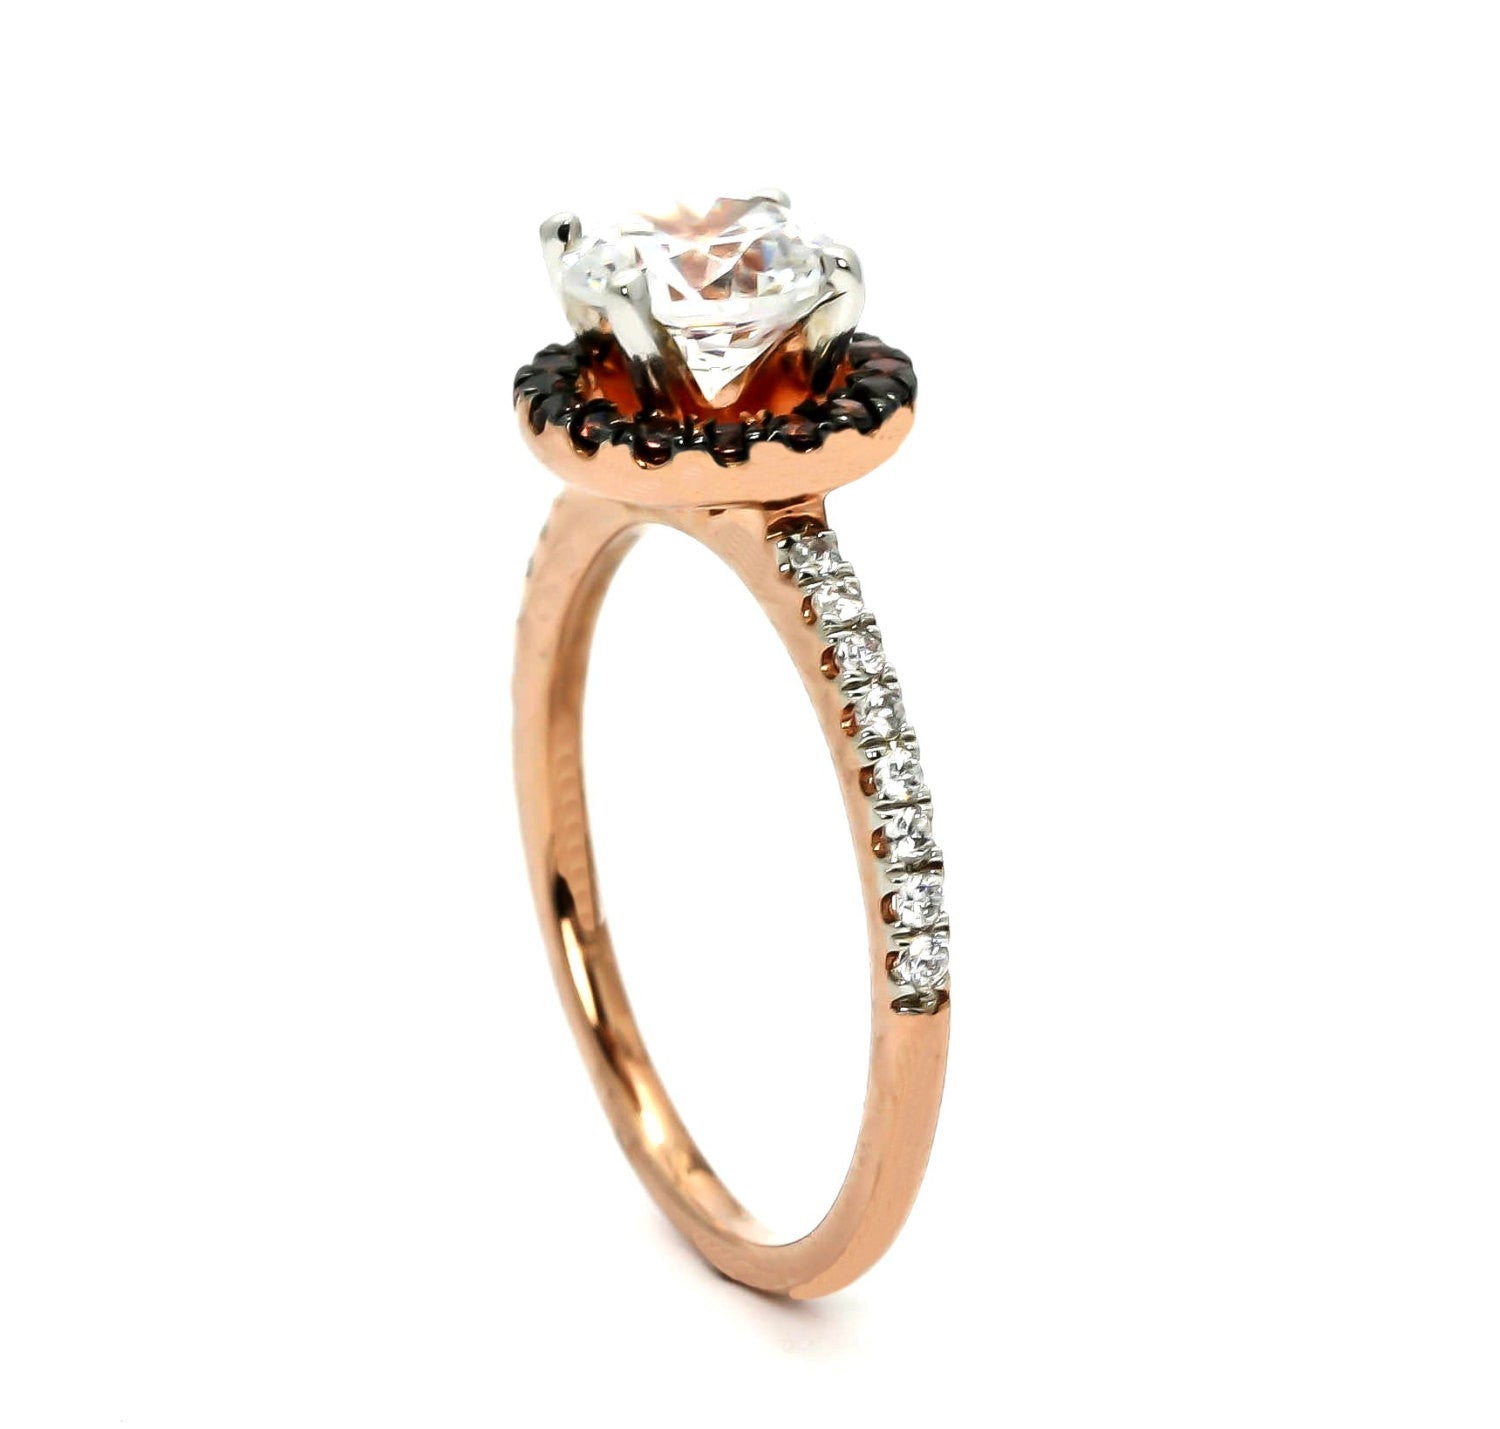 Fancy Brown Diamond Halo, White Diamond Accent Stones, Rose Gold, Semi Mount For 1 Carat Stone Engagement Ring, Anniversary Ring - 94639